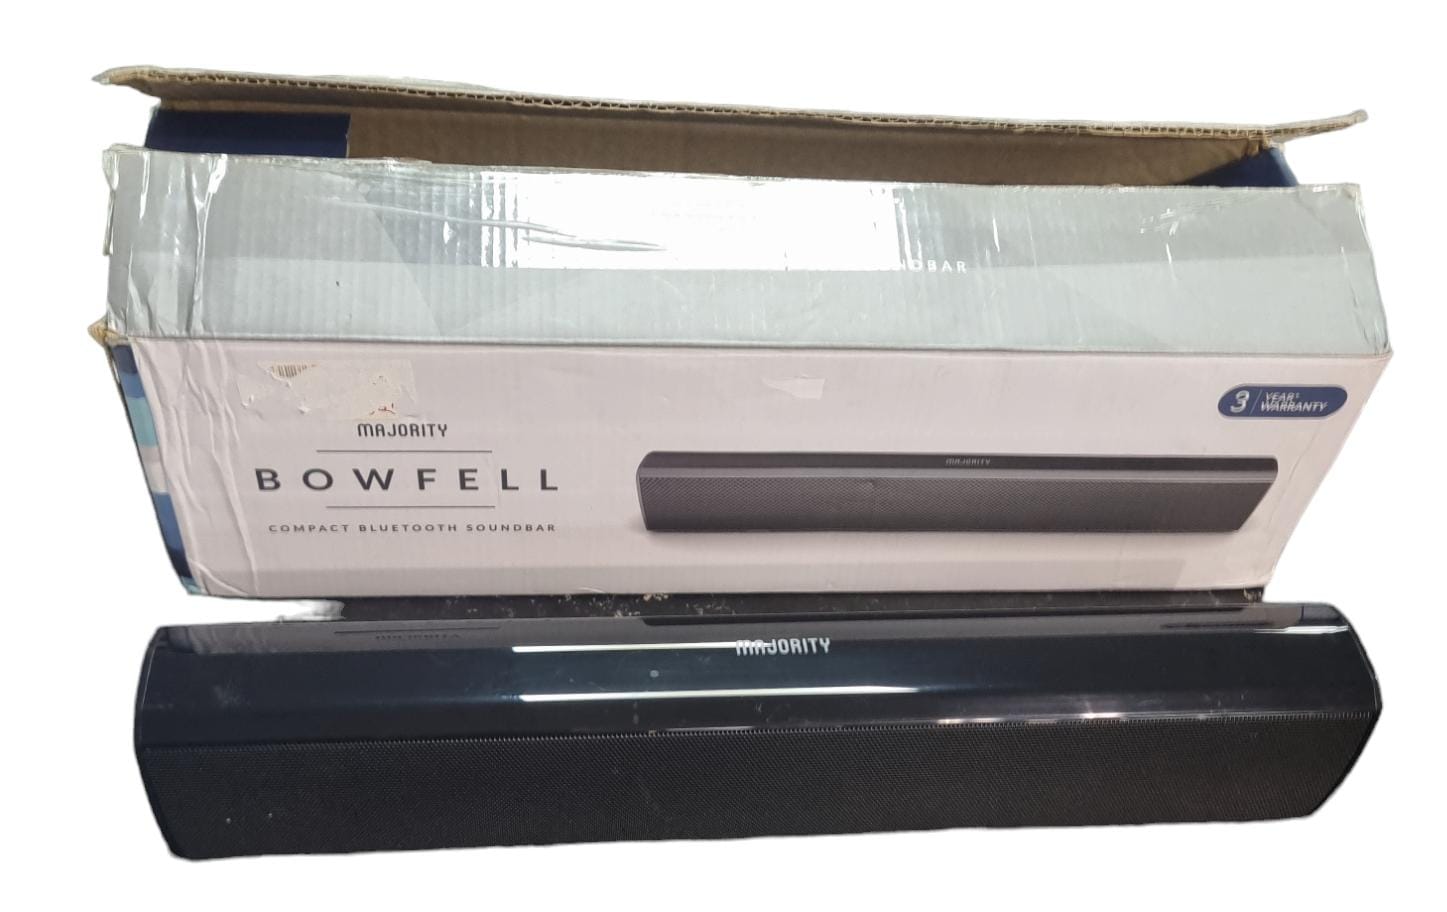 Majority Bowfell 2.1Ch All In One Sound Bar - Boxed - NO REMOTE